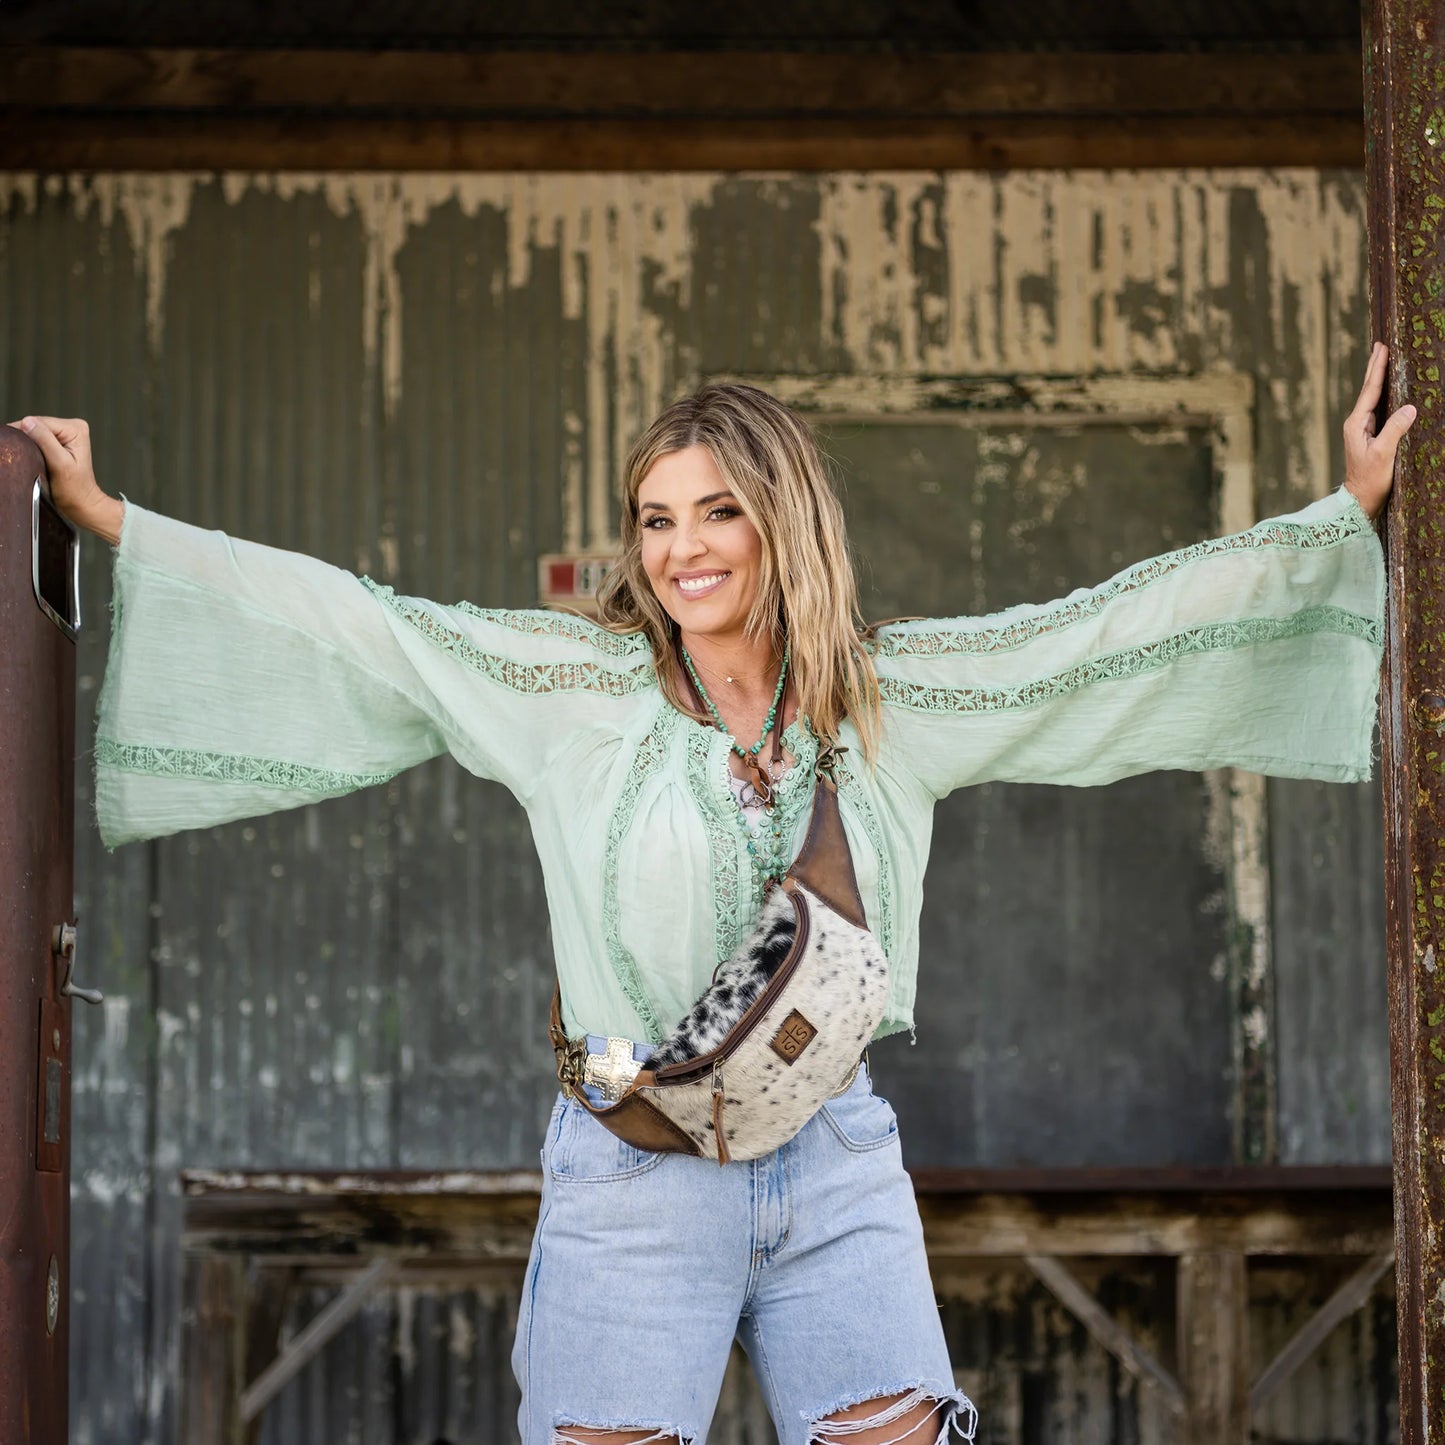 STS Ranchwear Roswell Cowhide Hildy Belt Bag - STS 32245